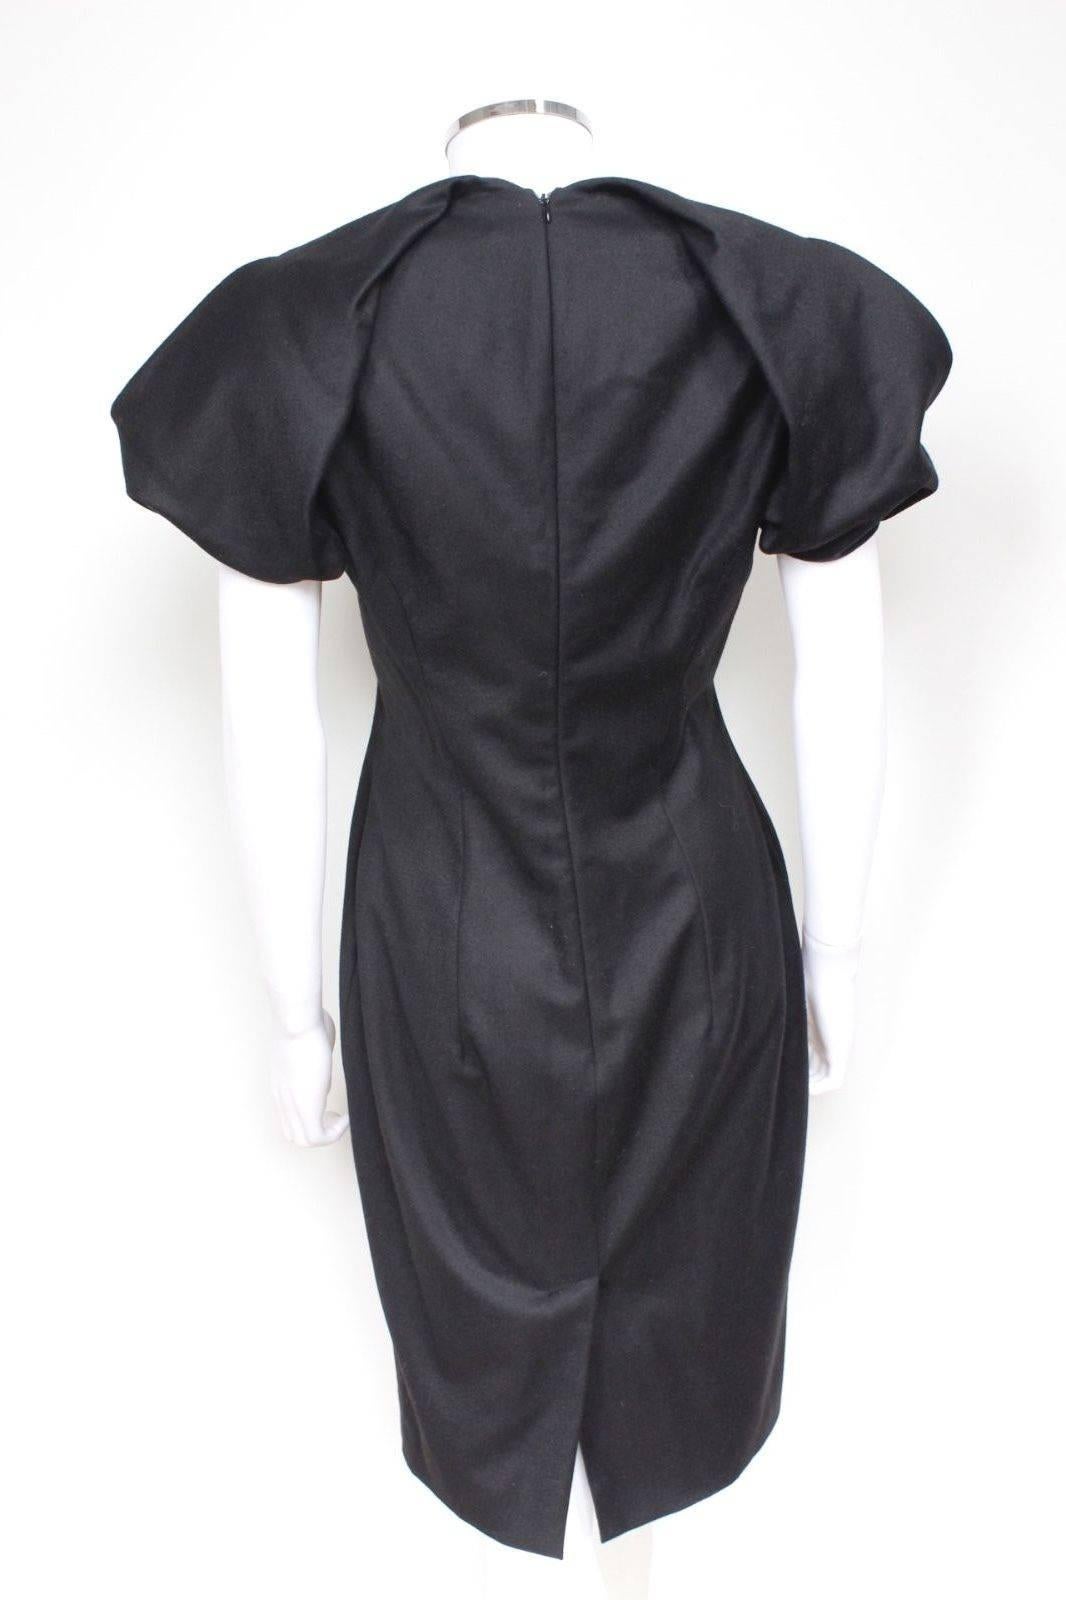 ALEXANDER MCQUEEN Black Wool-crepe Pleated Shoulder Dress It 44 uk 12 
Black wool-crepe dress from Alexander McQueen featuring exaggerated pleated cap sleeves, a v- neck, split hem to the back and concealed zip at rear for closure. 
The dress is